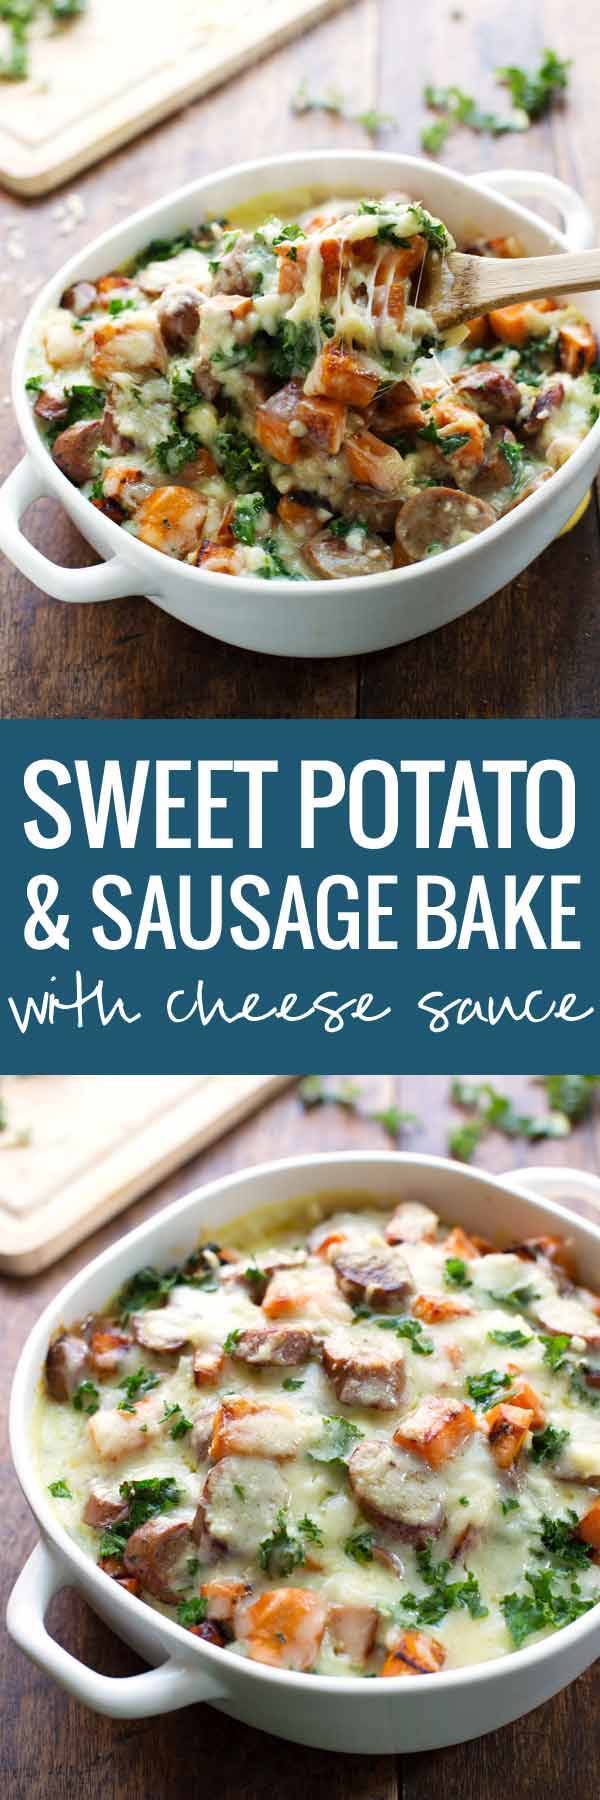 Sweet Potato, Kale, and Sausage Bake with White Cheese Sauce - comfort food featuring a handful of pantry staples and a few super healthy ingredients. | pinchofyum.com